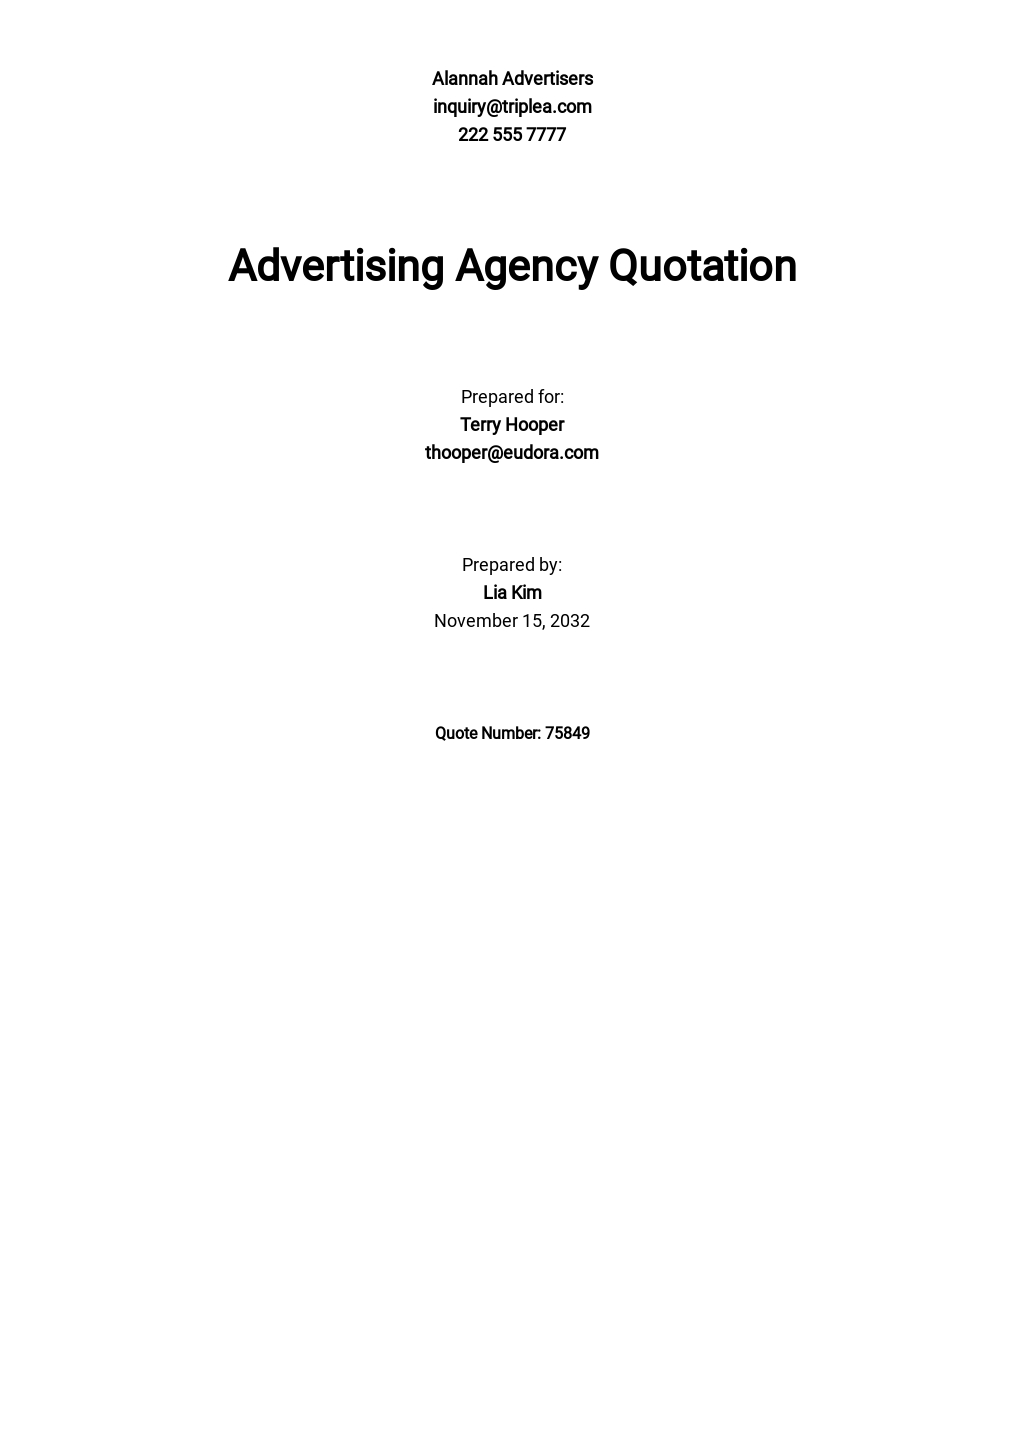 Simple Advertising Agency Quotation Template - Google Docs, Google Sheets, Excel, Word